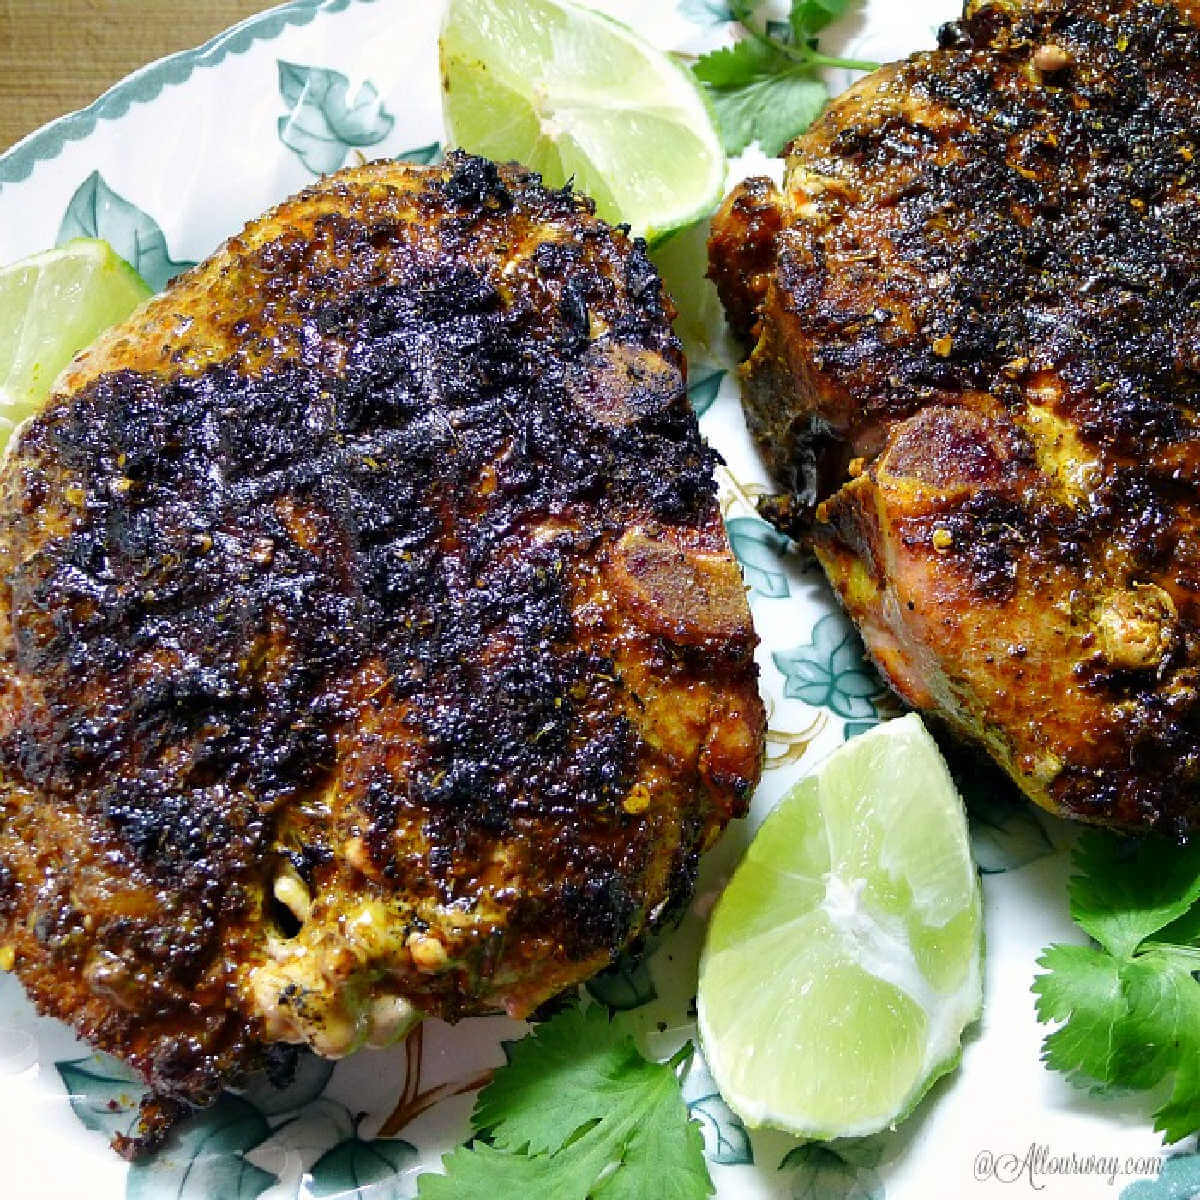 Grilled Lime Adobo Rubbed Pork Chops have the flavor of Mexico with lime on green leaf platter.